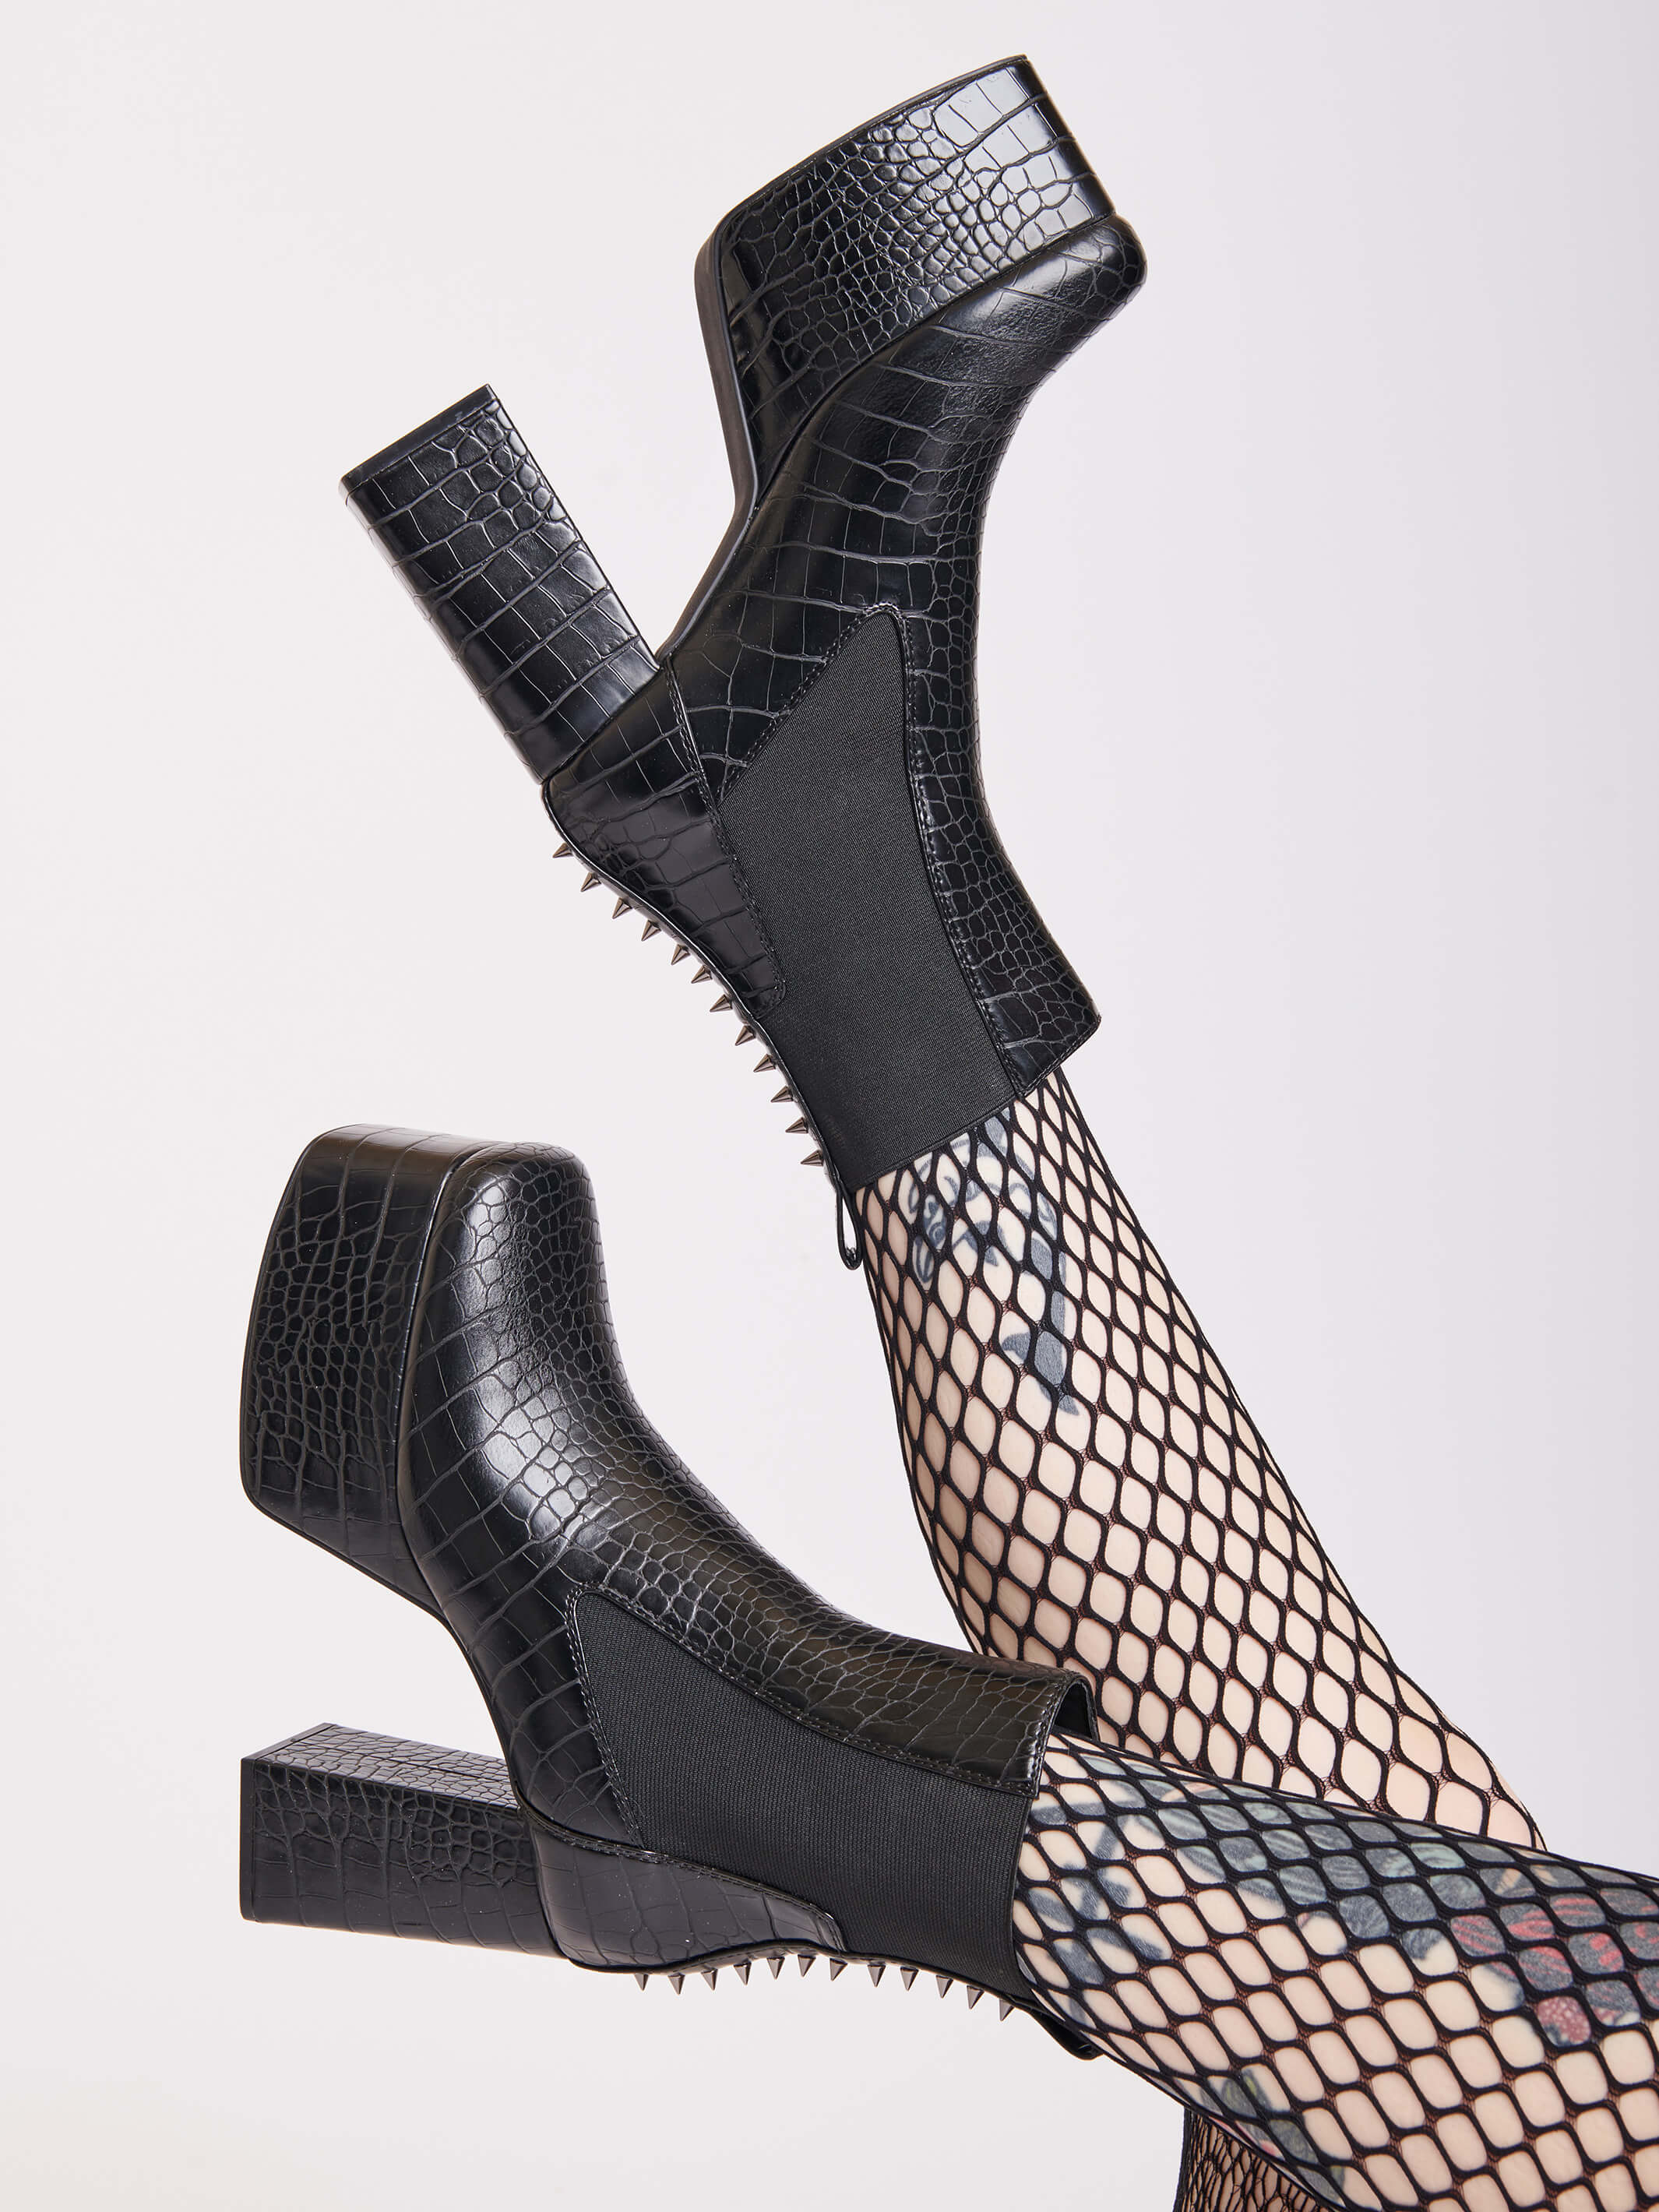 faux croc skin platform boots with spikes down the back